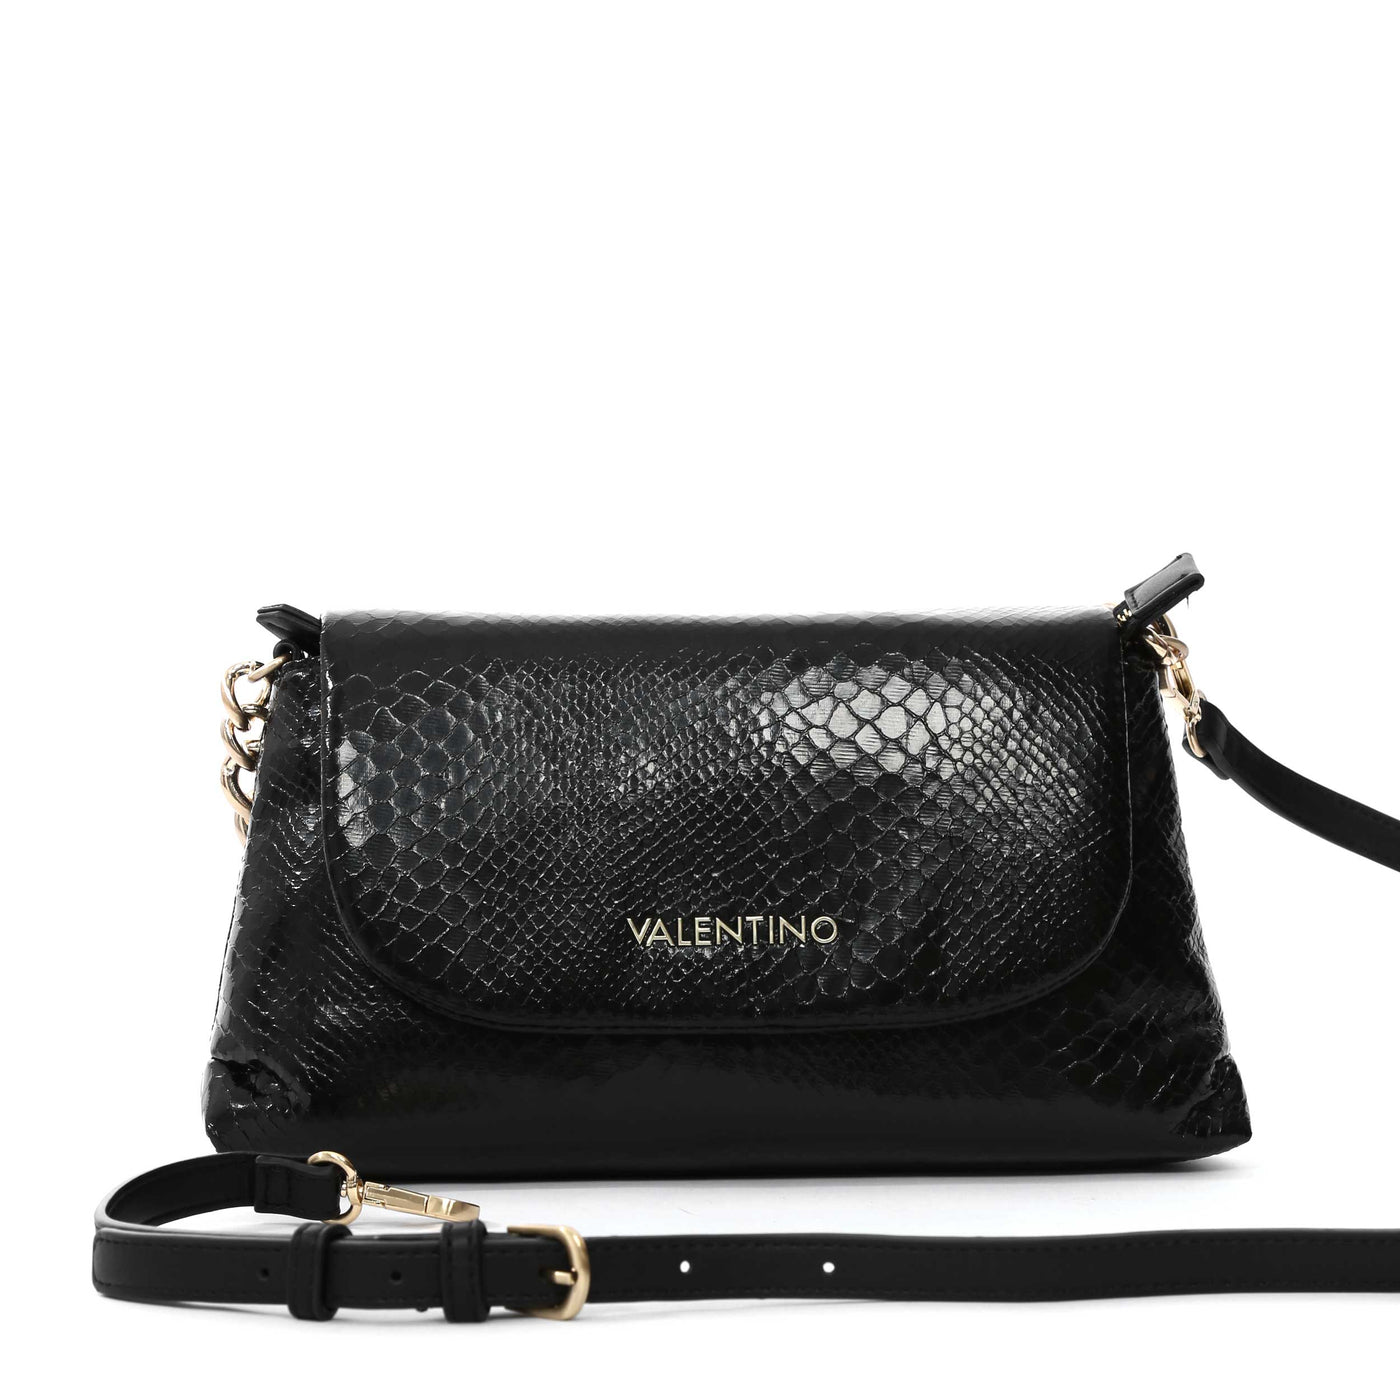 Valentino Bags Friends Ladies Flap Bag in Black Front